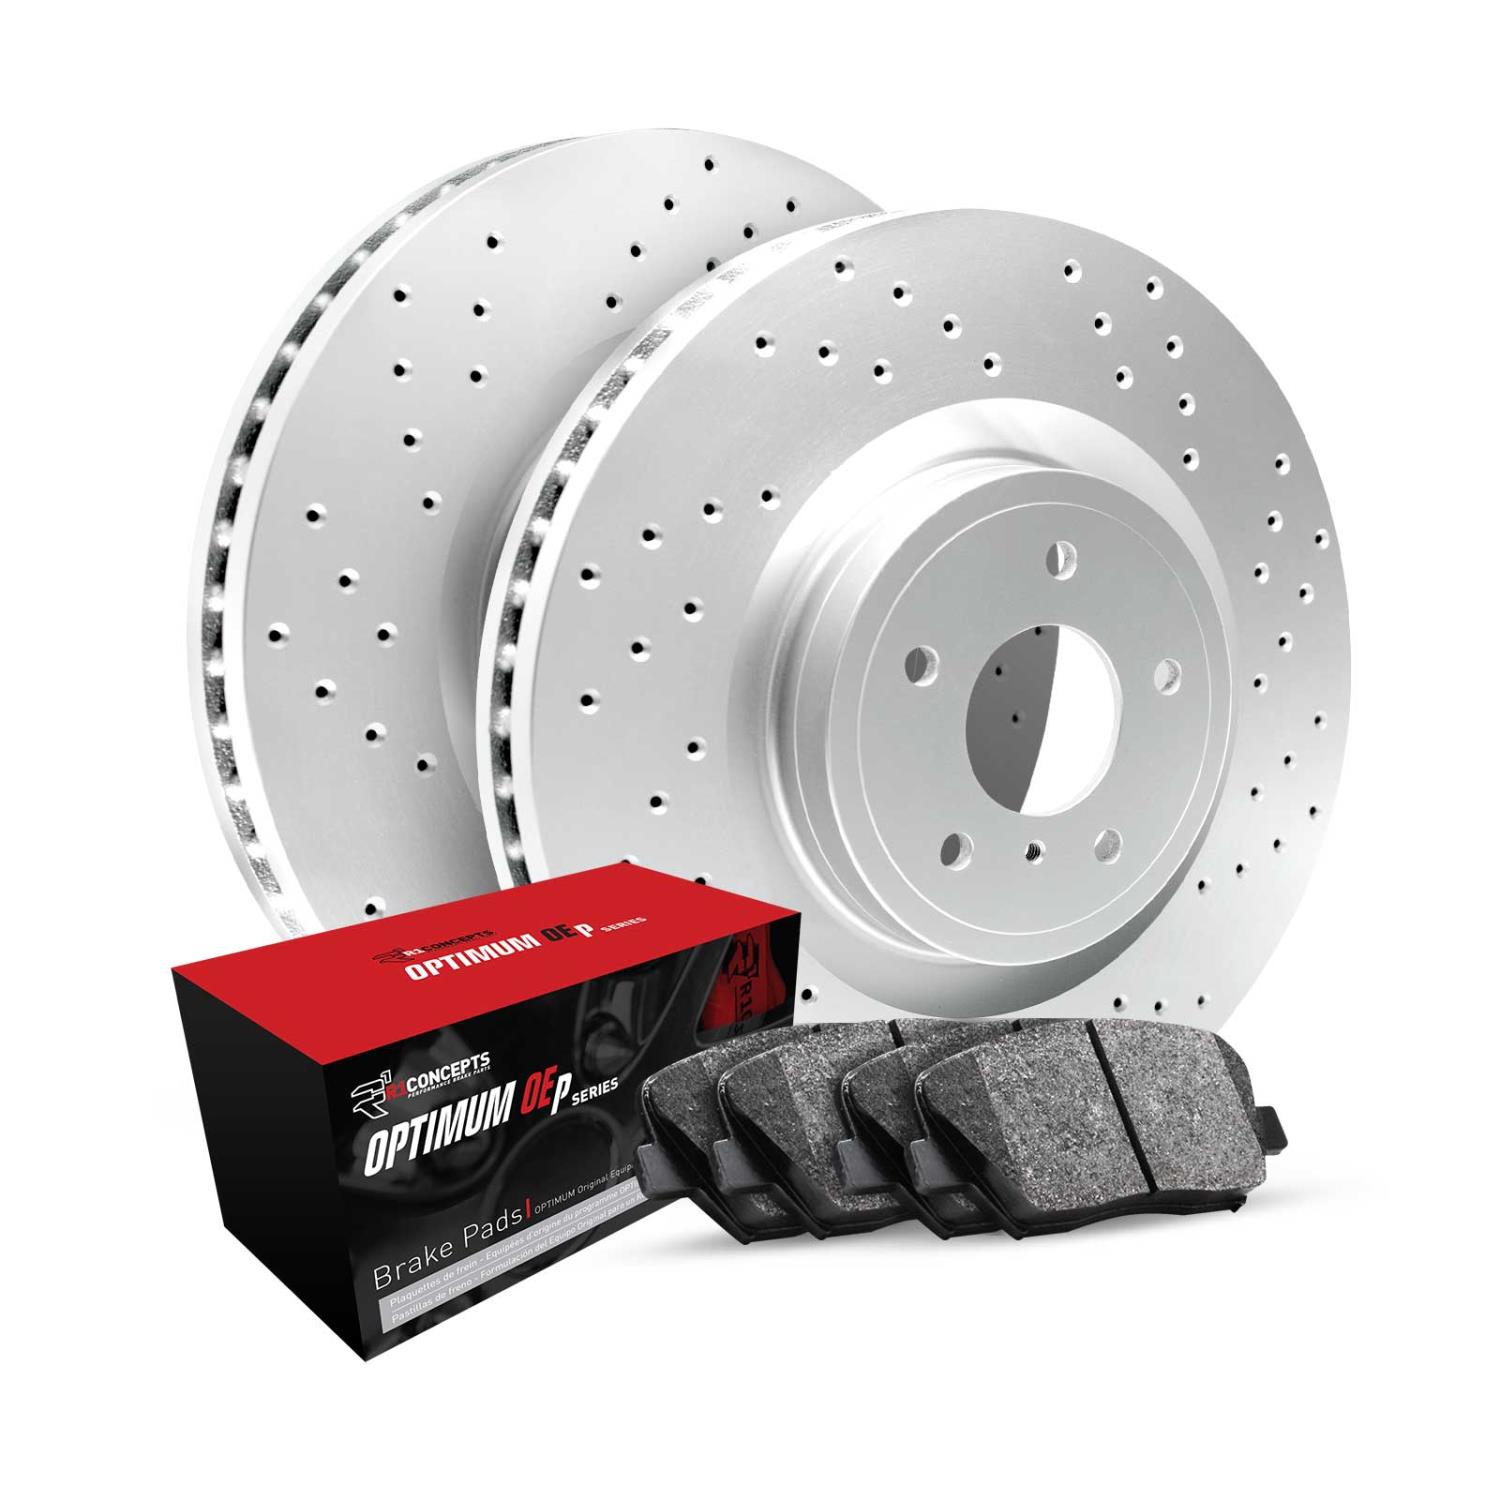 GEO-Carbon Drilled Brake Rotor Set w/Optimum OE Pads, 1991-1999 Fits Multiple Makes/Models, Position: Rear